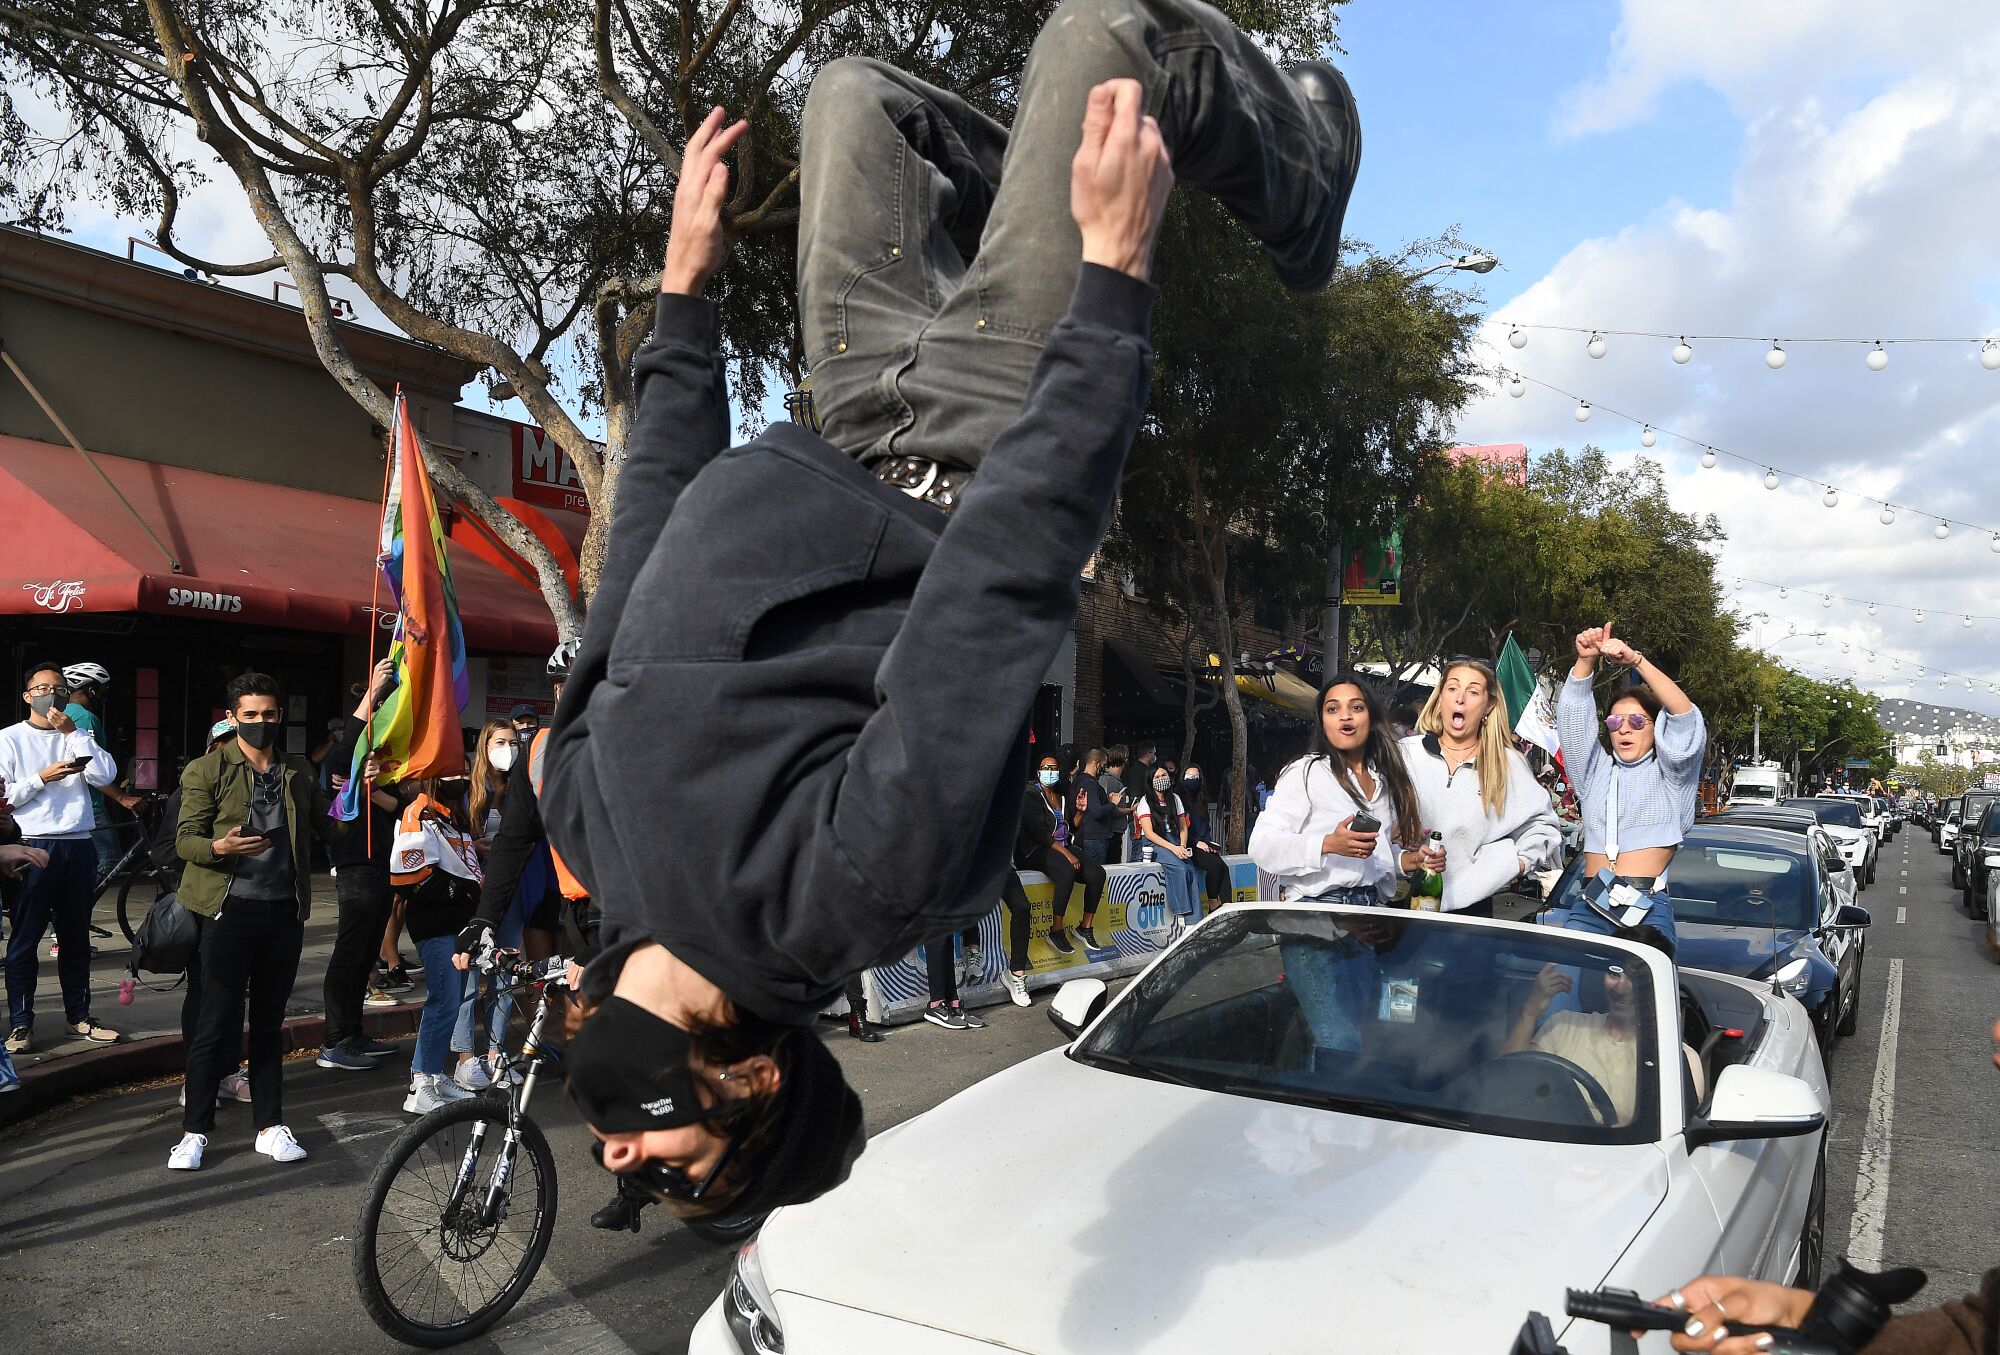 A Biden supporter does a back flip off the hood of a car in celebration in West Hollywood.